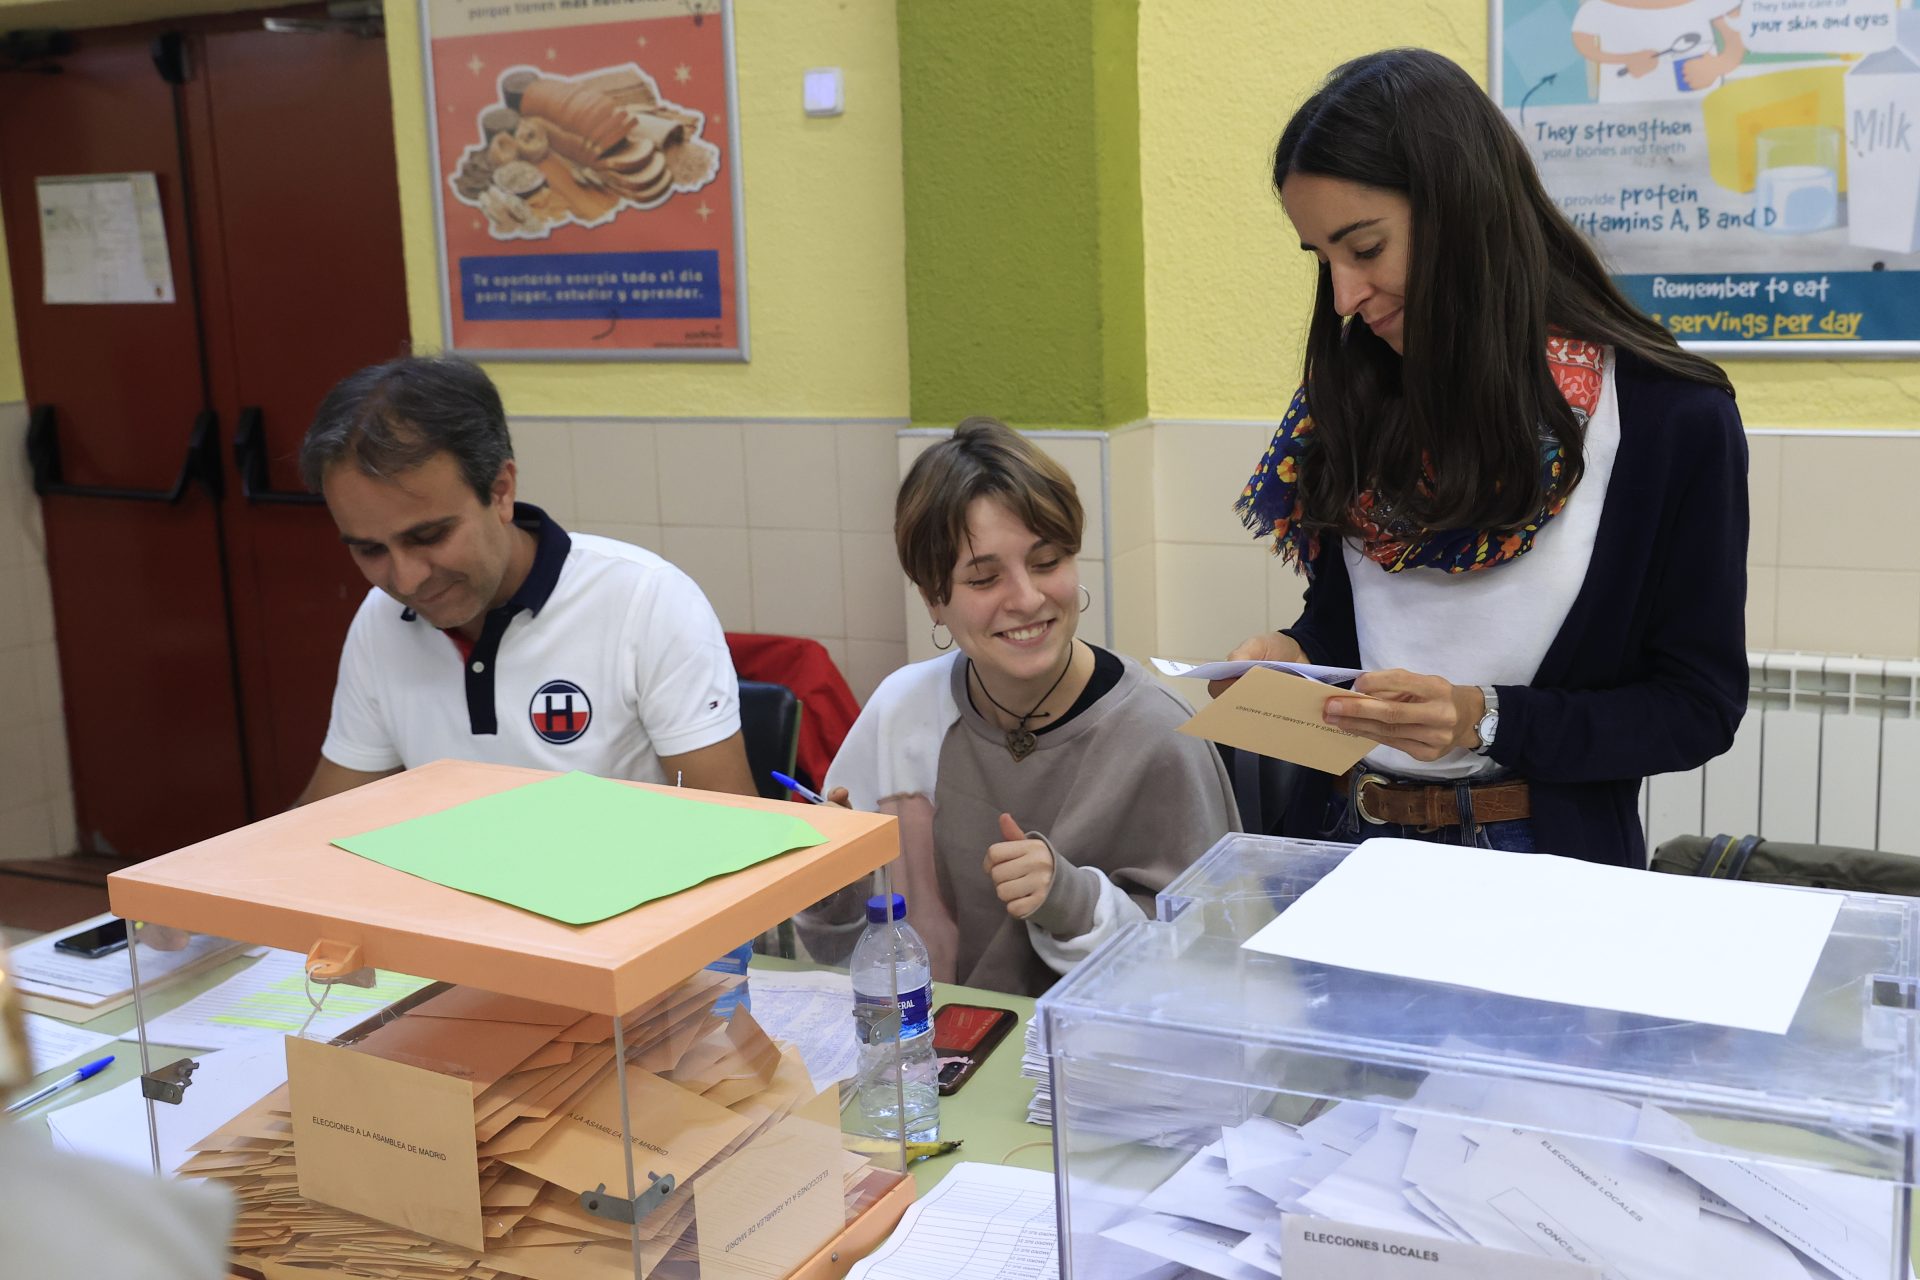 The members of a polling station of the CEIP Ciudad de Roma college proceed to count the votes, after the closure of their polling station this Sunday in Madrid.  BLAZETRENDS/Zipi Aragon